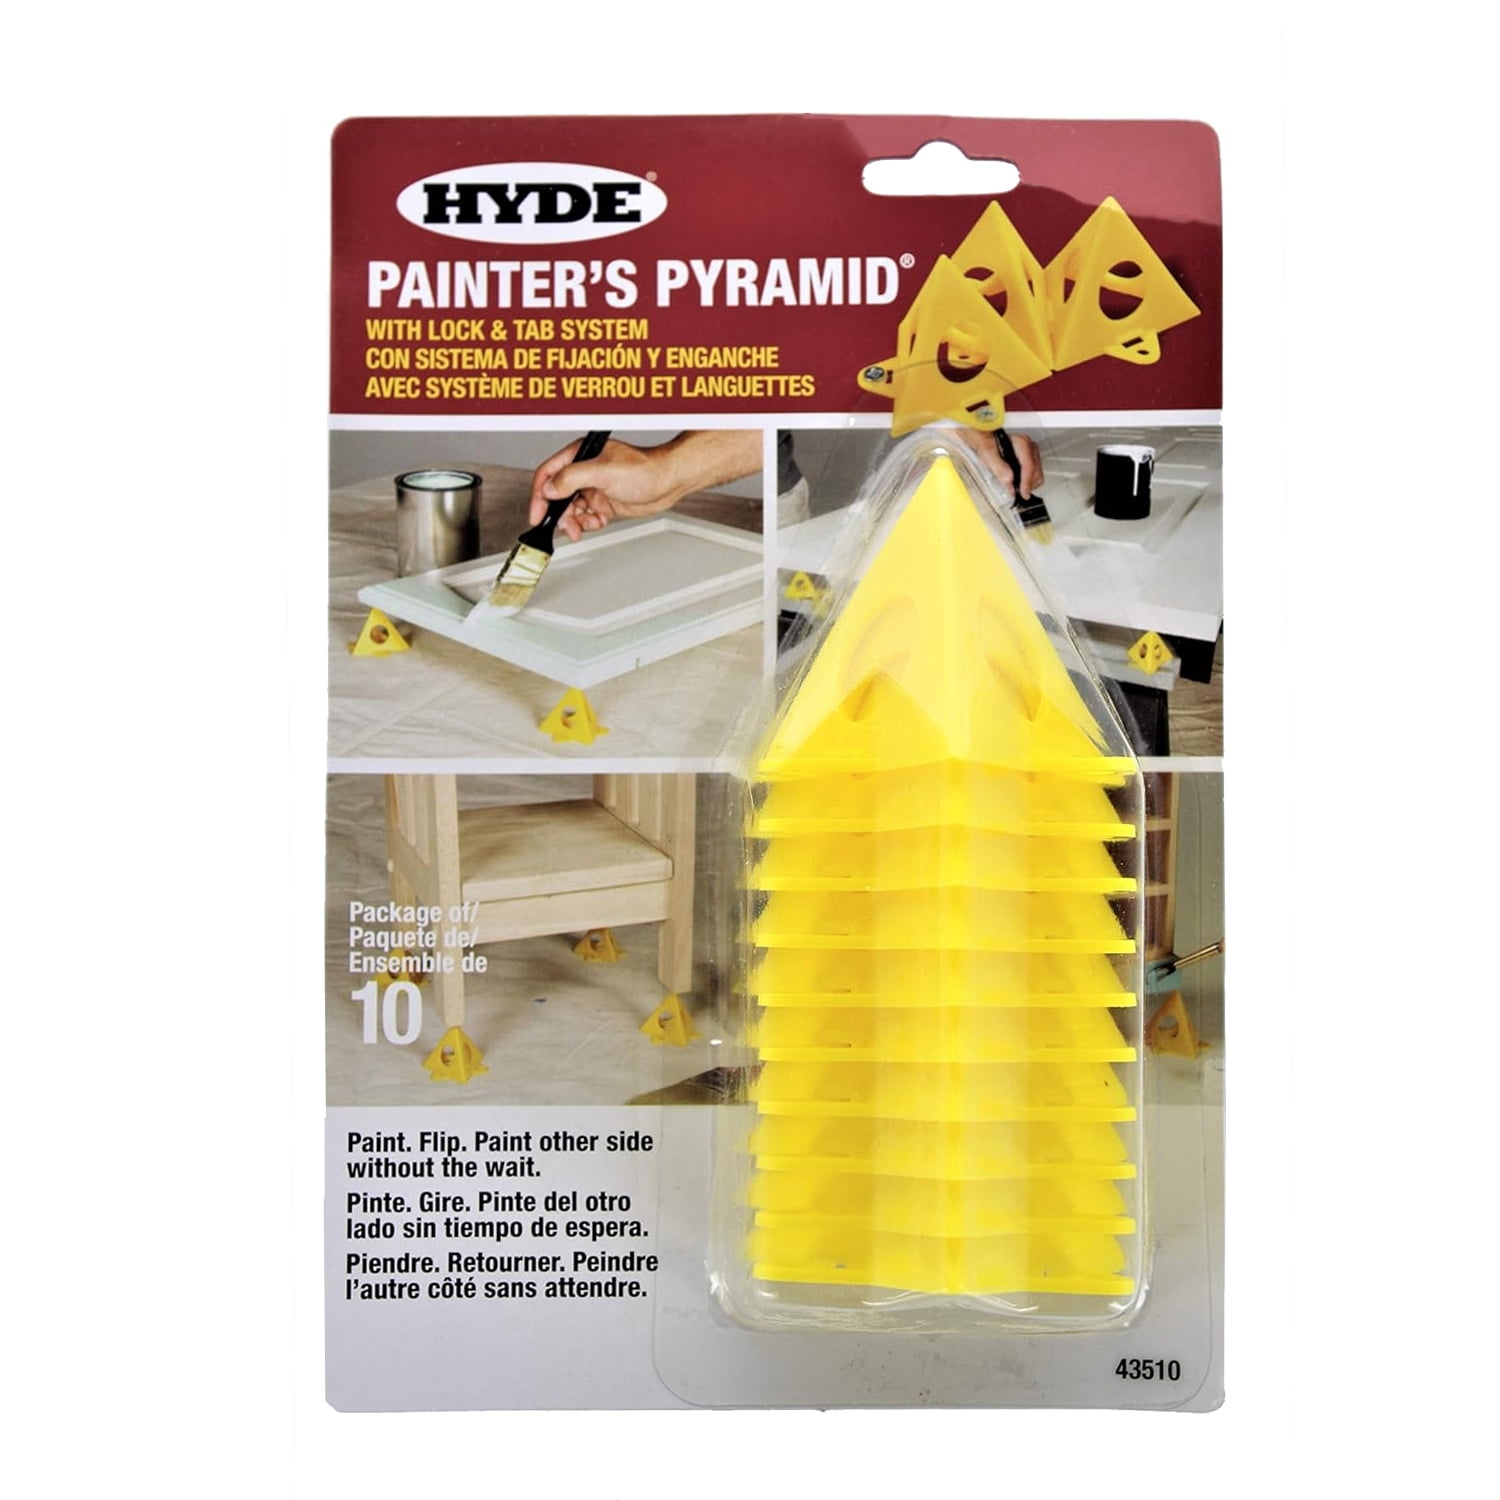 HYDE Painters Pyramid Painting System - 10 Pieces